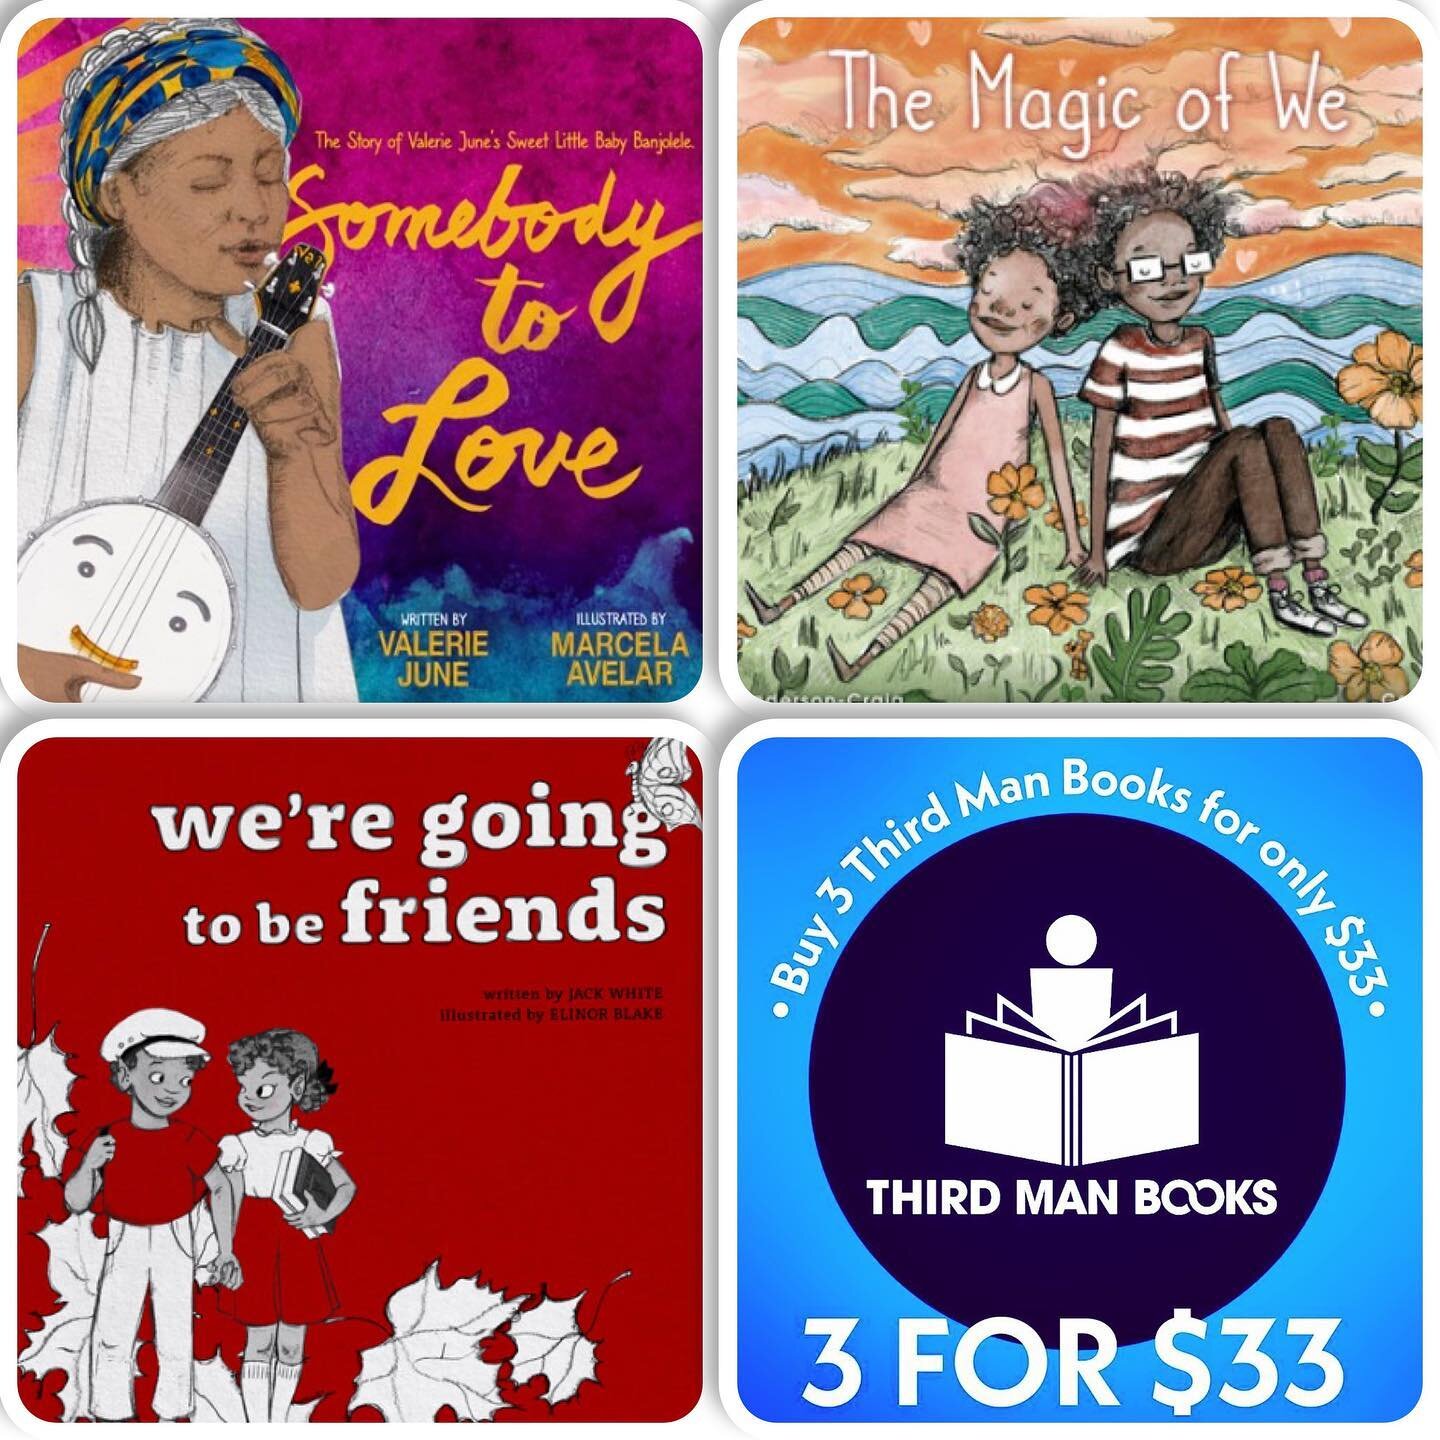 For the kids (and adults) of all ages!!! Three excellent children&rsquo;s books about friendship, growing up, . . . and music!
#childrensbooks #somebodytolove #valeriejune #marcelaavelar #themagicofwe #danielleandersoncraig #weregoingtobefriends #jac